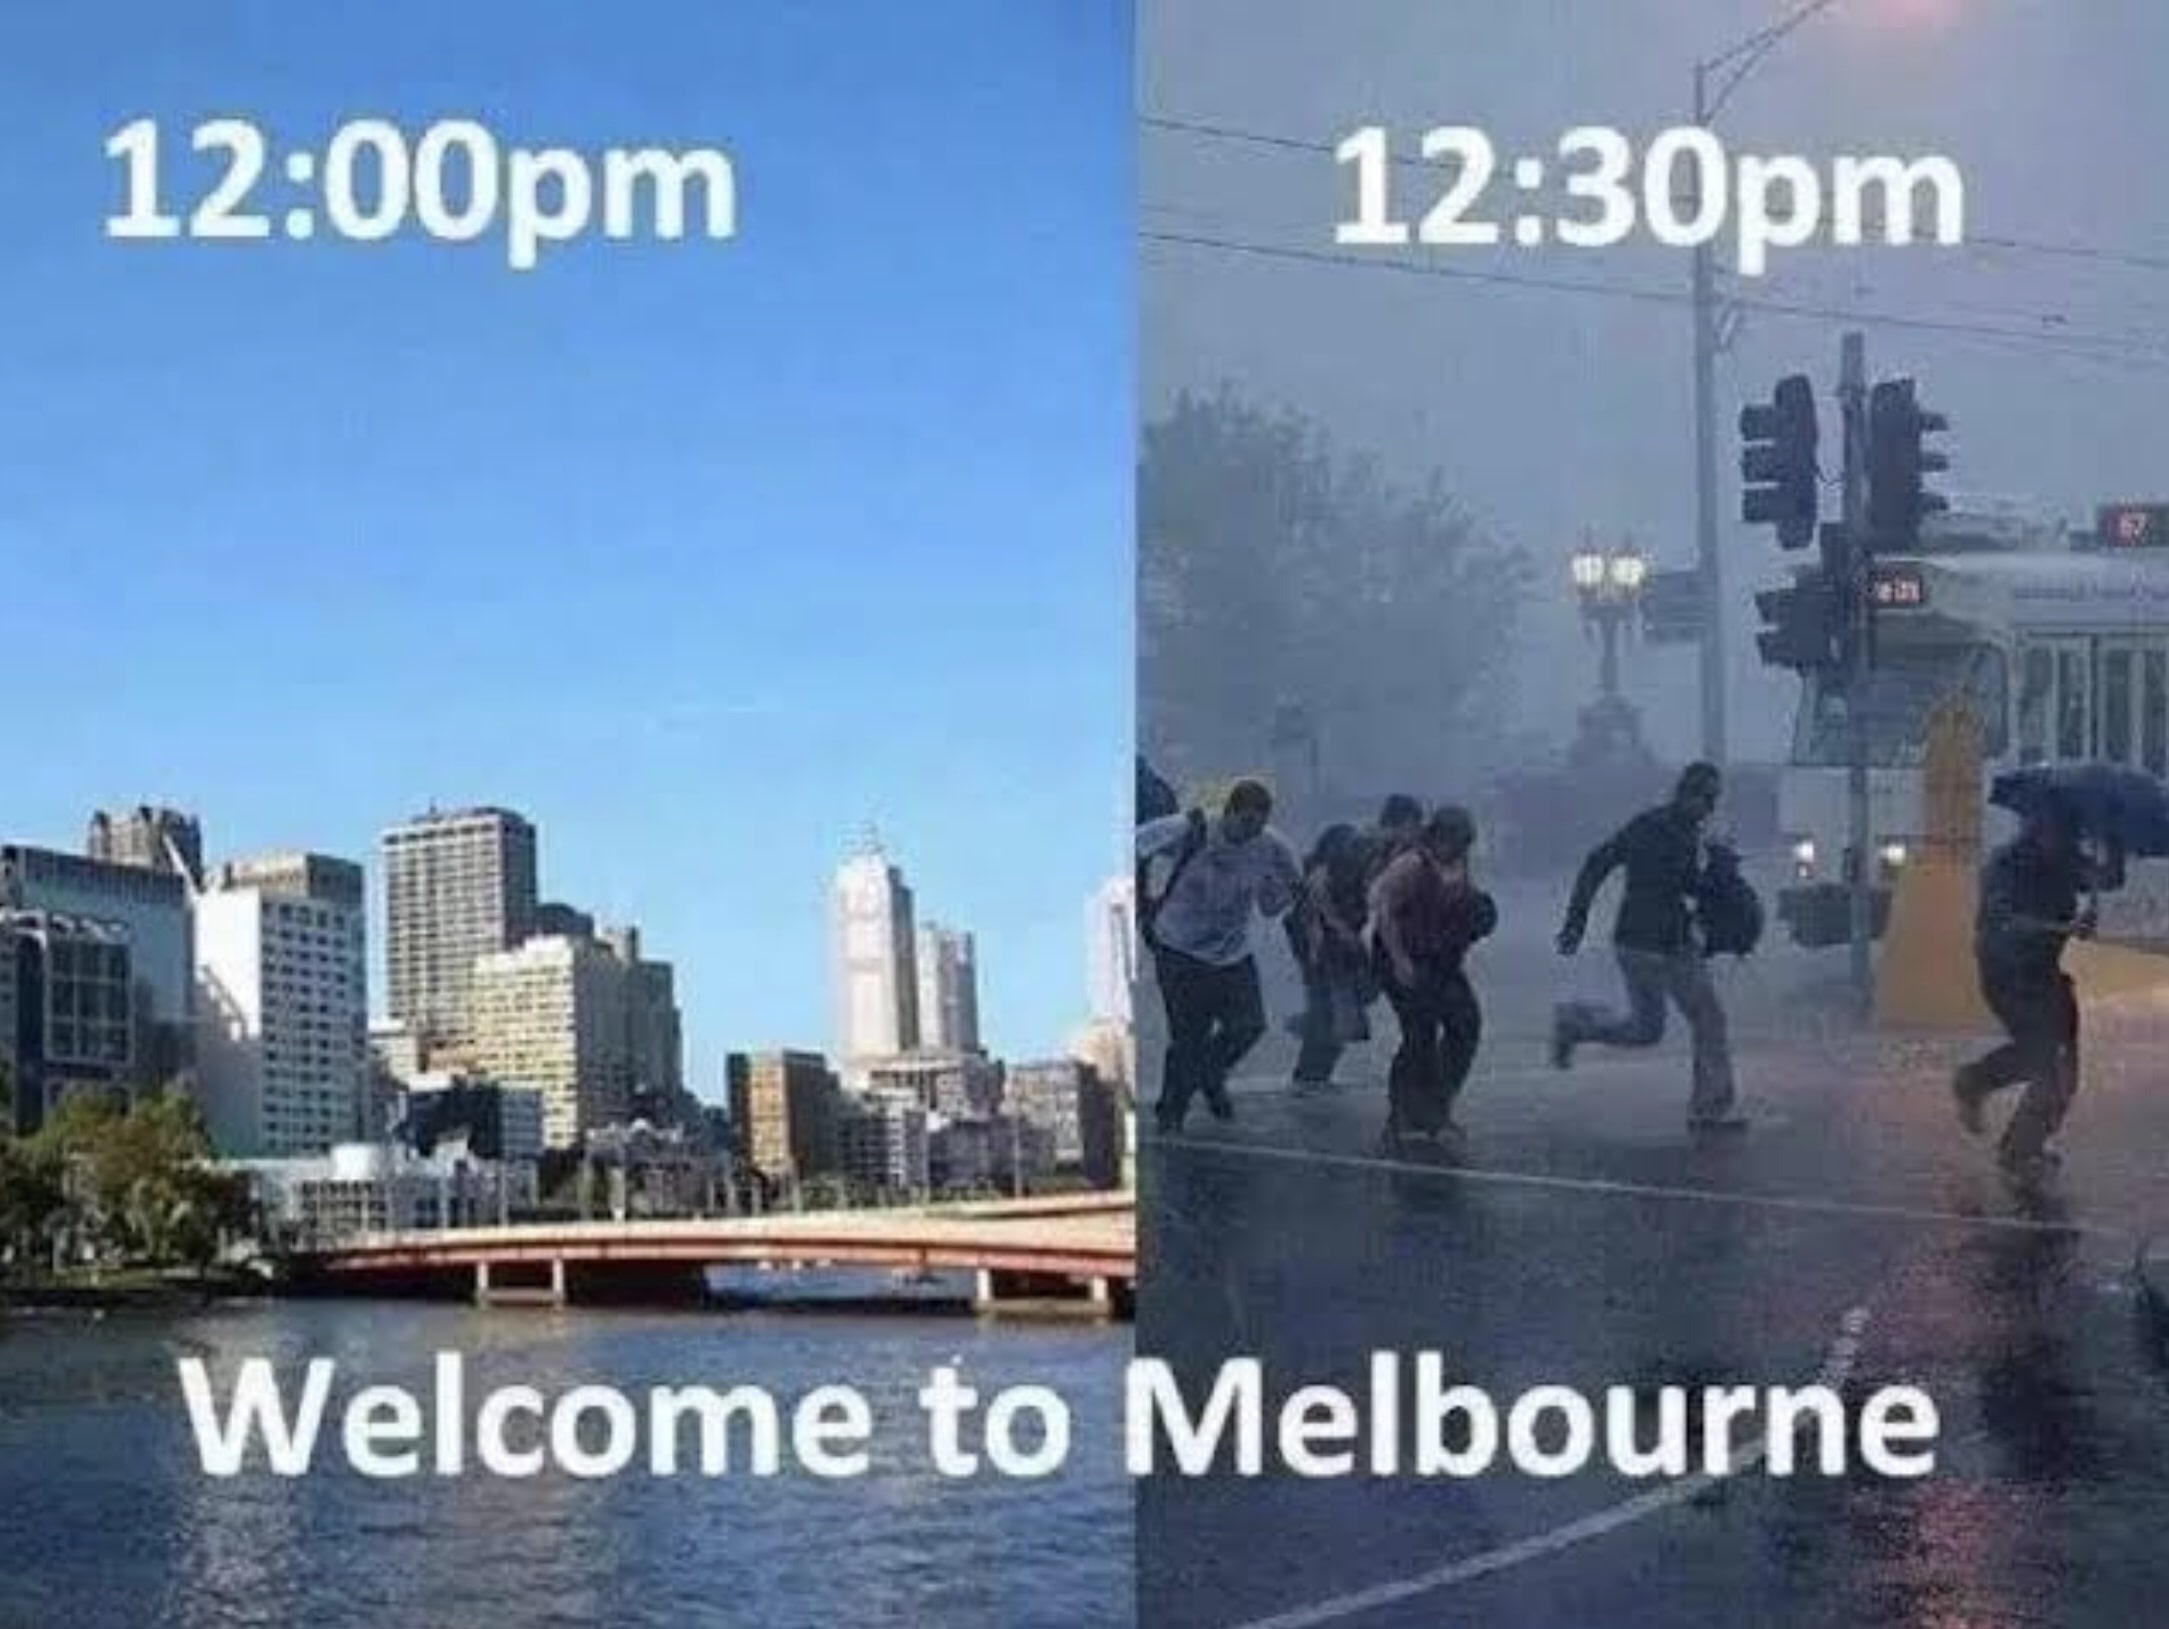 Melbourne weather is unpredictable at best